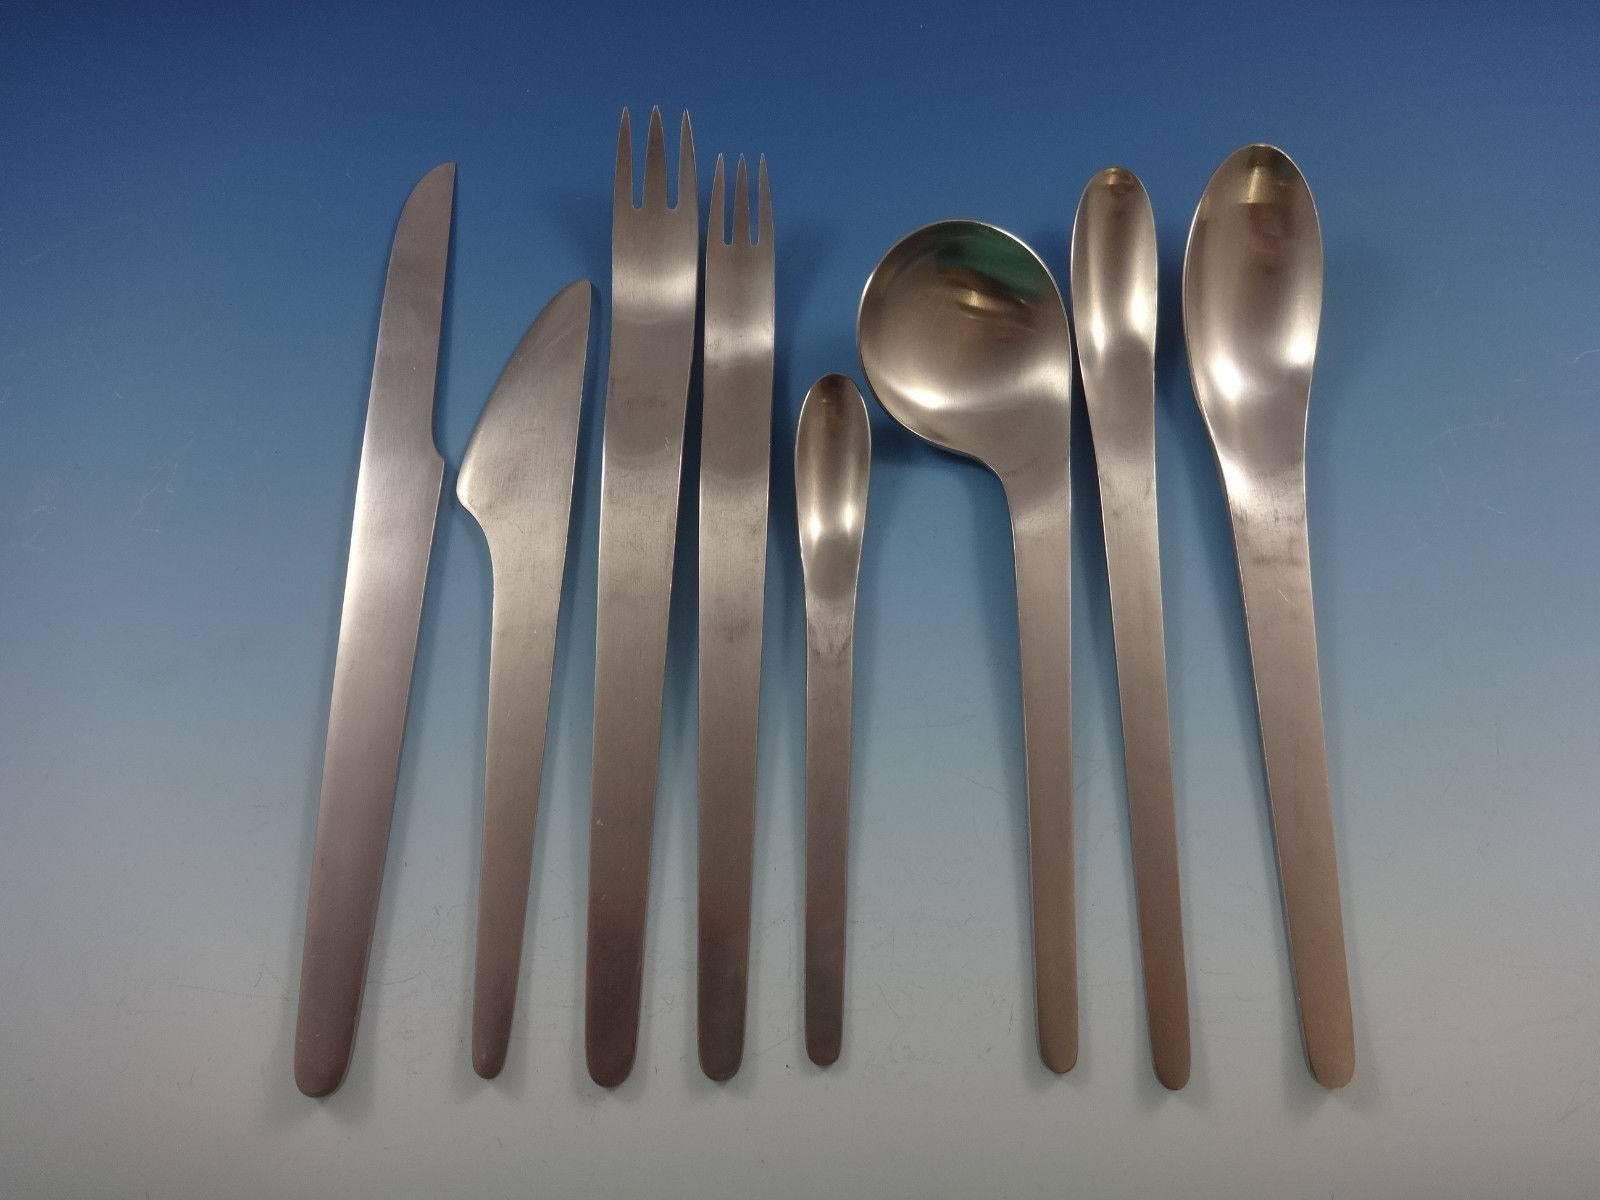 Designed in 1957 by Danish architect Arne Jacobsen, the Arne Jacobsen pattern is revered for its futuristic, modernism design. Created originally for the SAS Royal Hotel in Copenhagen, the cutlery was highly innovative when launched in mid-1950s for